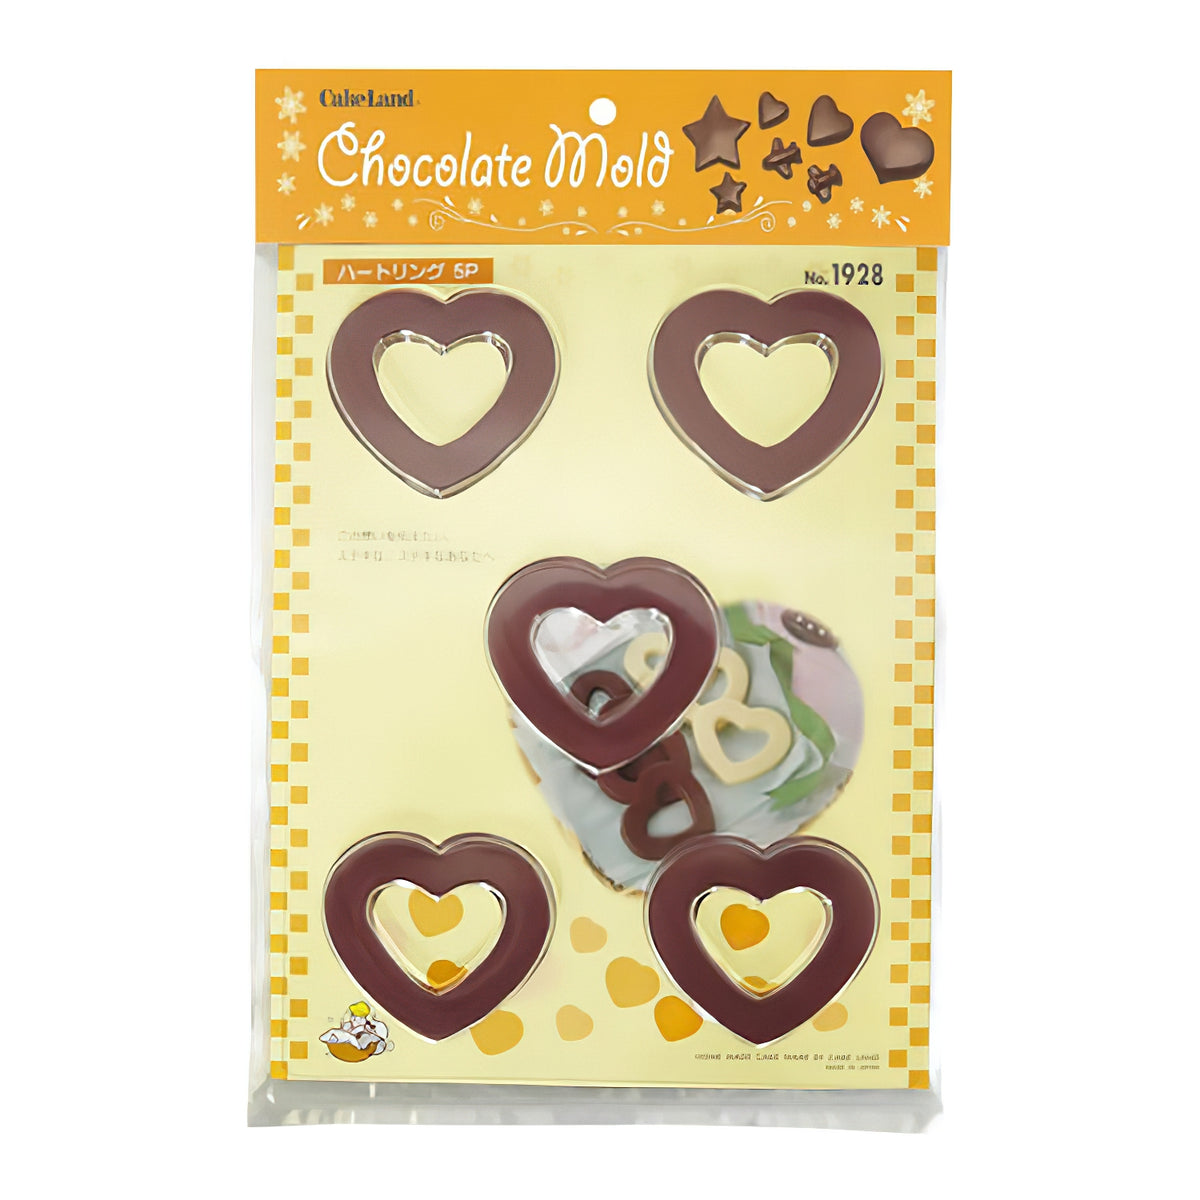 TIGERCROWN Polystyrene Heart Lolly Chocolate Mold - Globalkitchen Japan